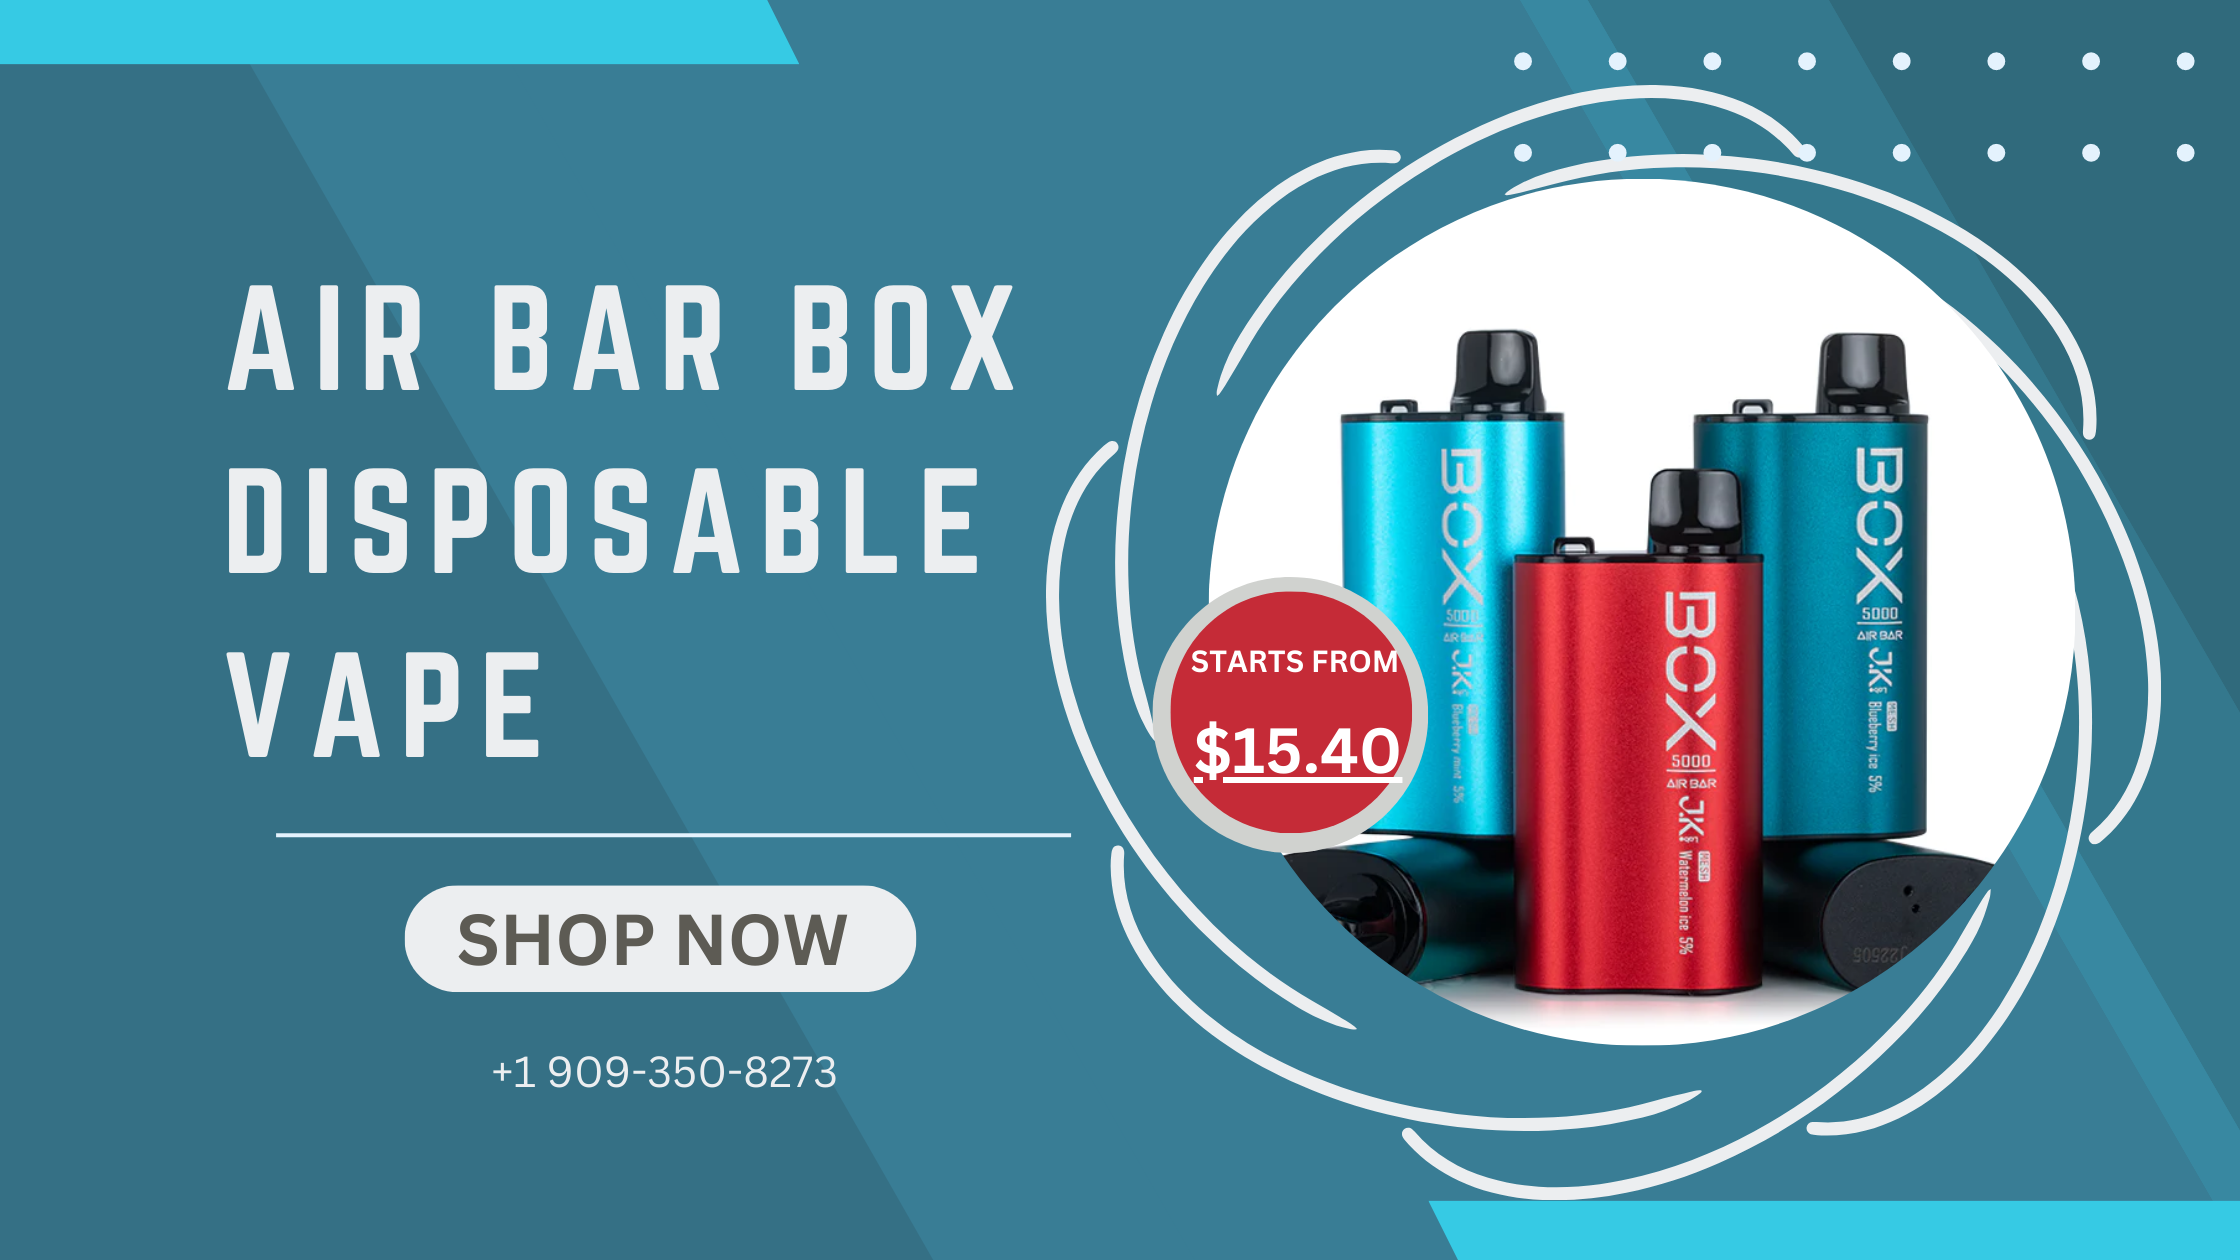 The Exposure of Vaping Experience with Air Bar Box Disposable Vape